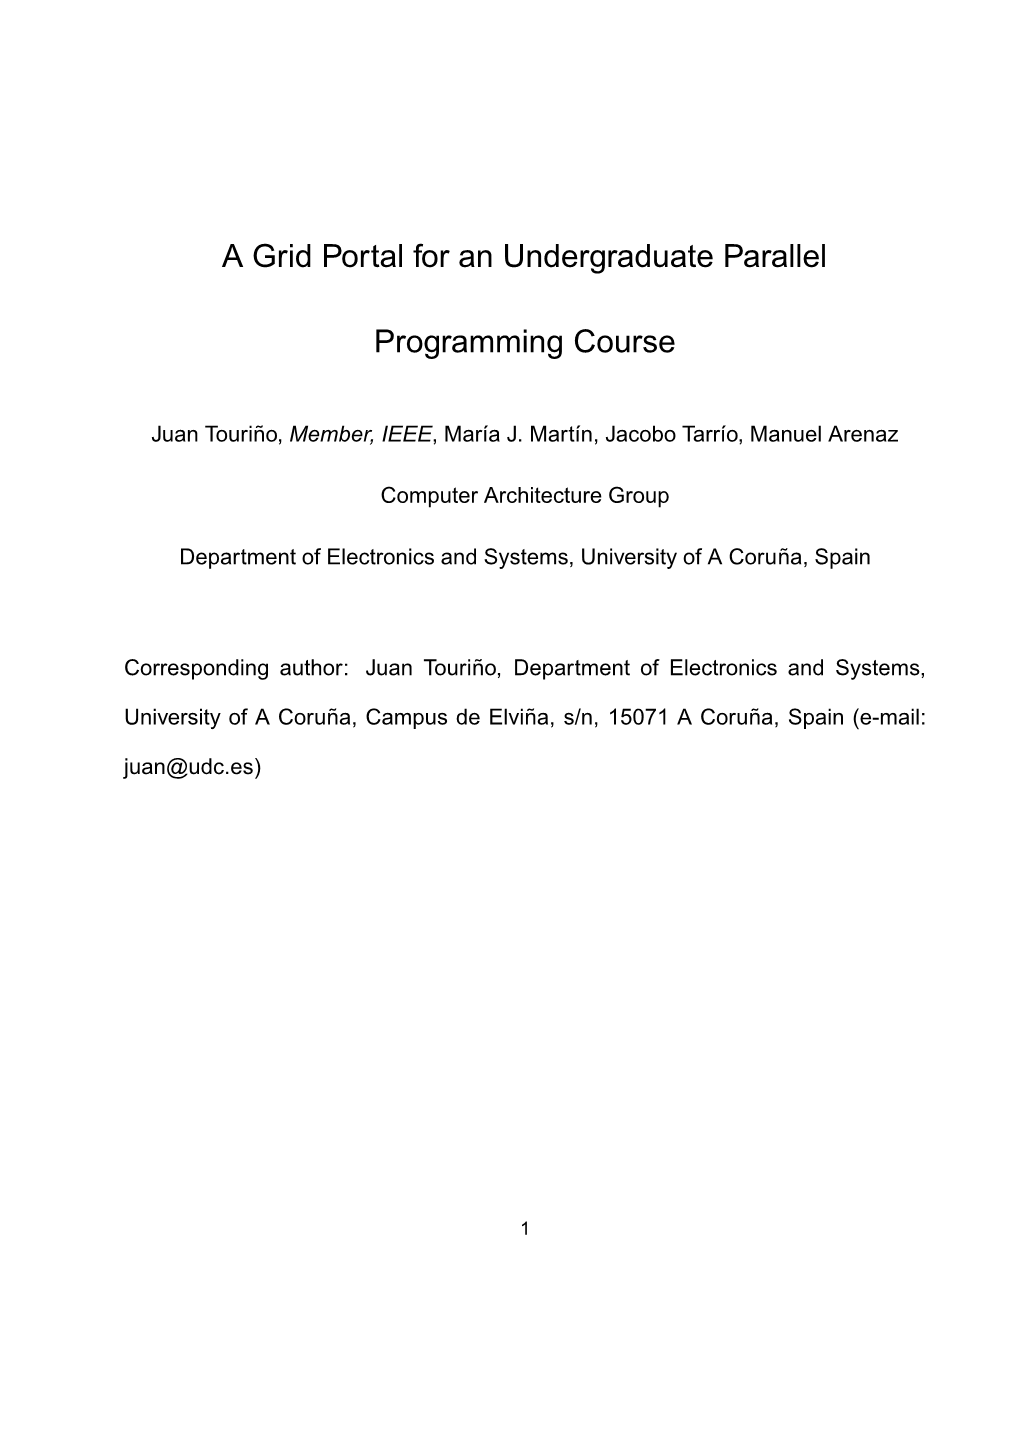 A Grid Portal for an Undergraduate Parallel Programming Course